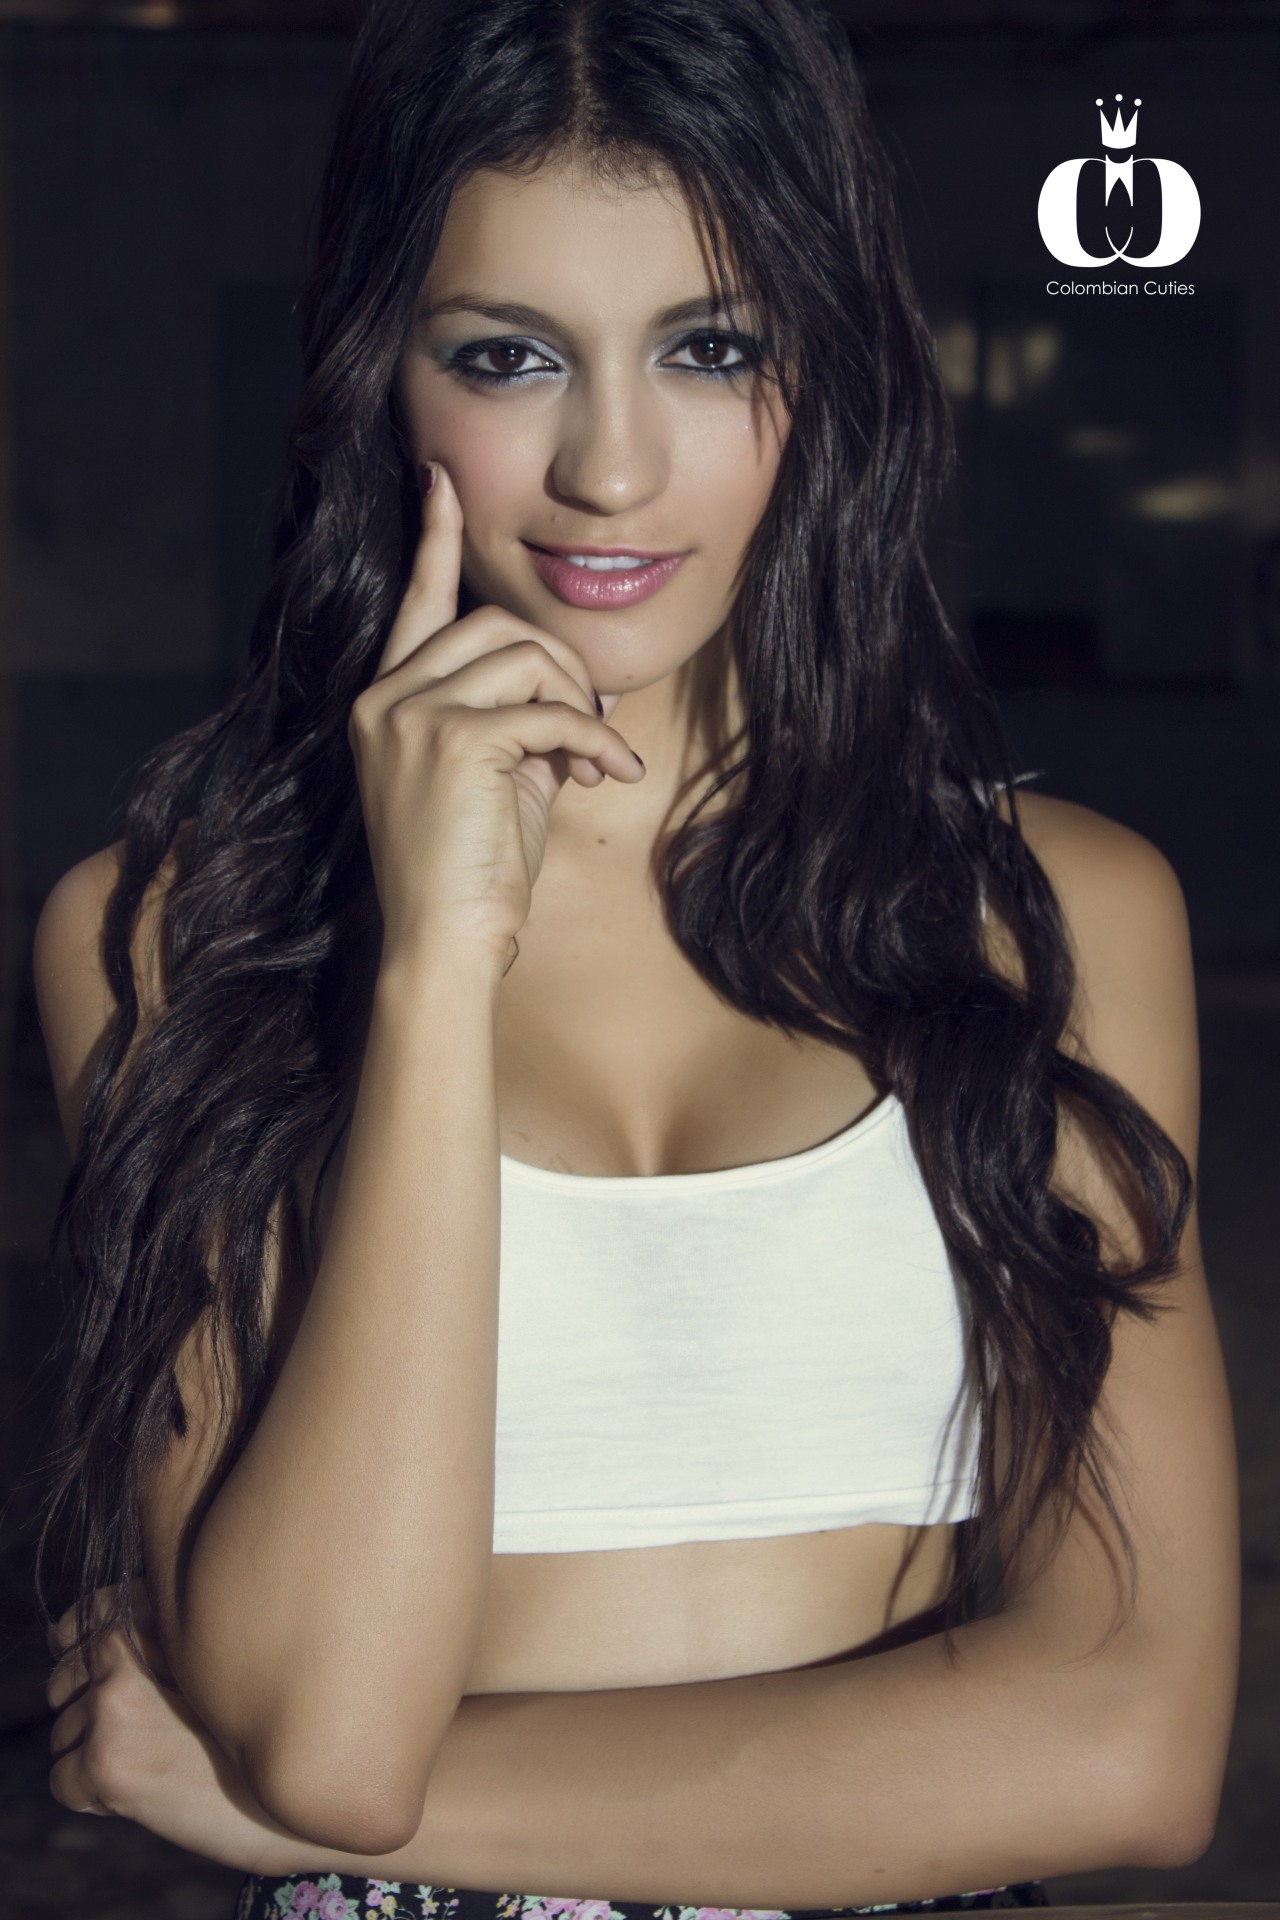 colombiancuties:  &ldquo;Bella Valentina&rdquo; is our Colombian Cutie of